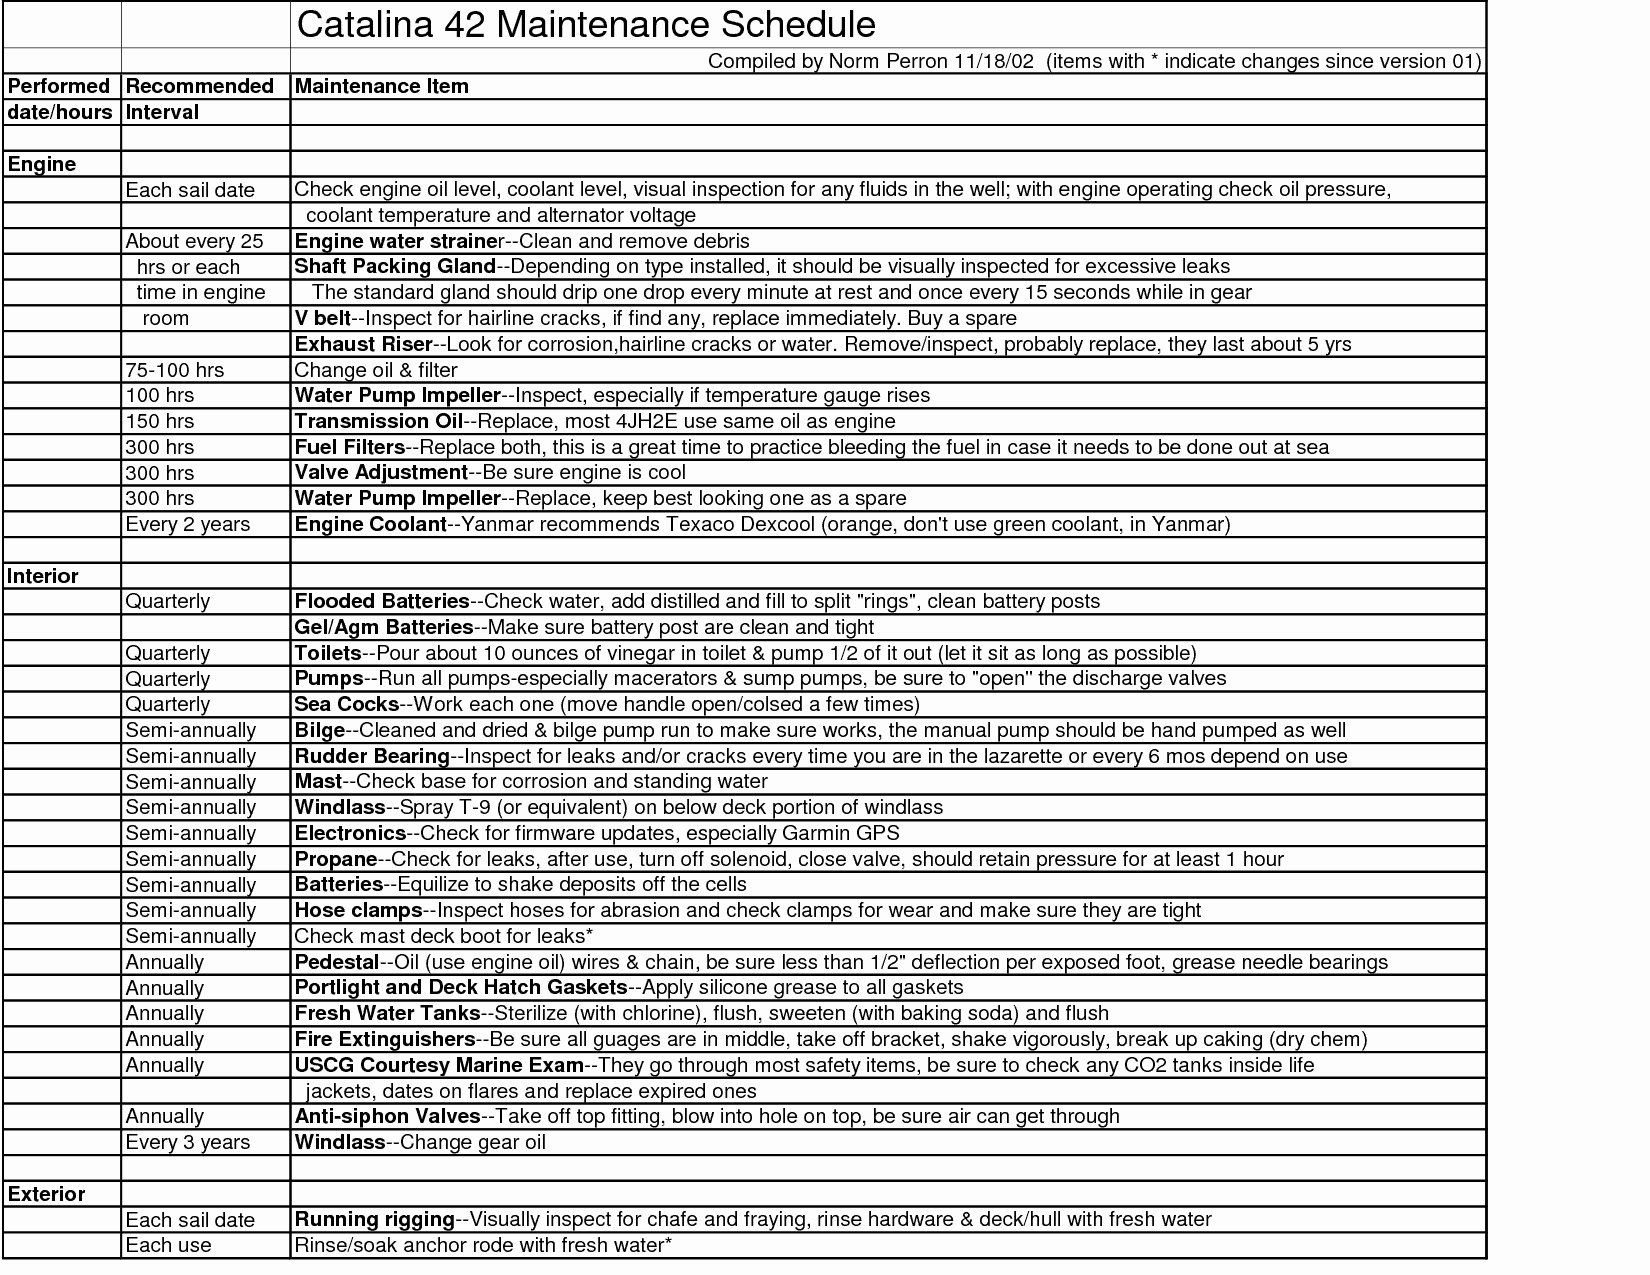 Building Maintenance Schedule Template Lovely 7 Facility Maintenance Checklist Templates Excel Templates